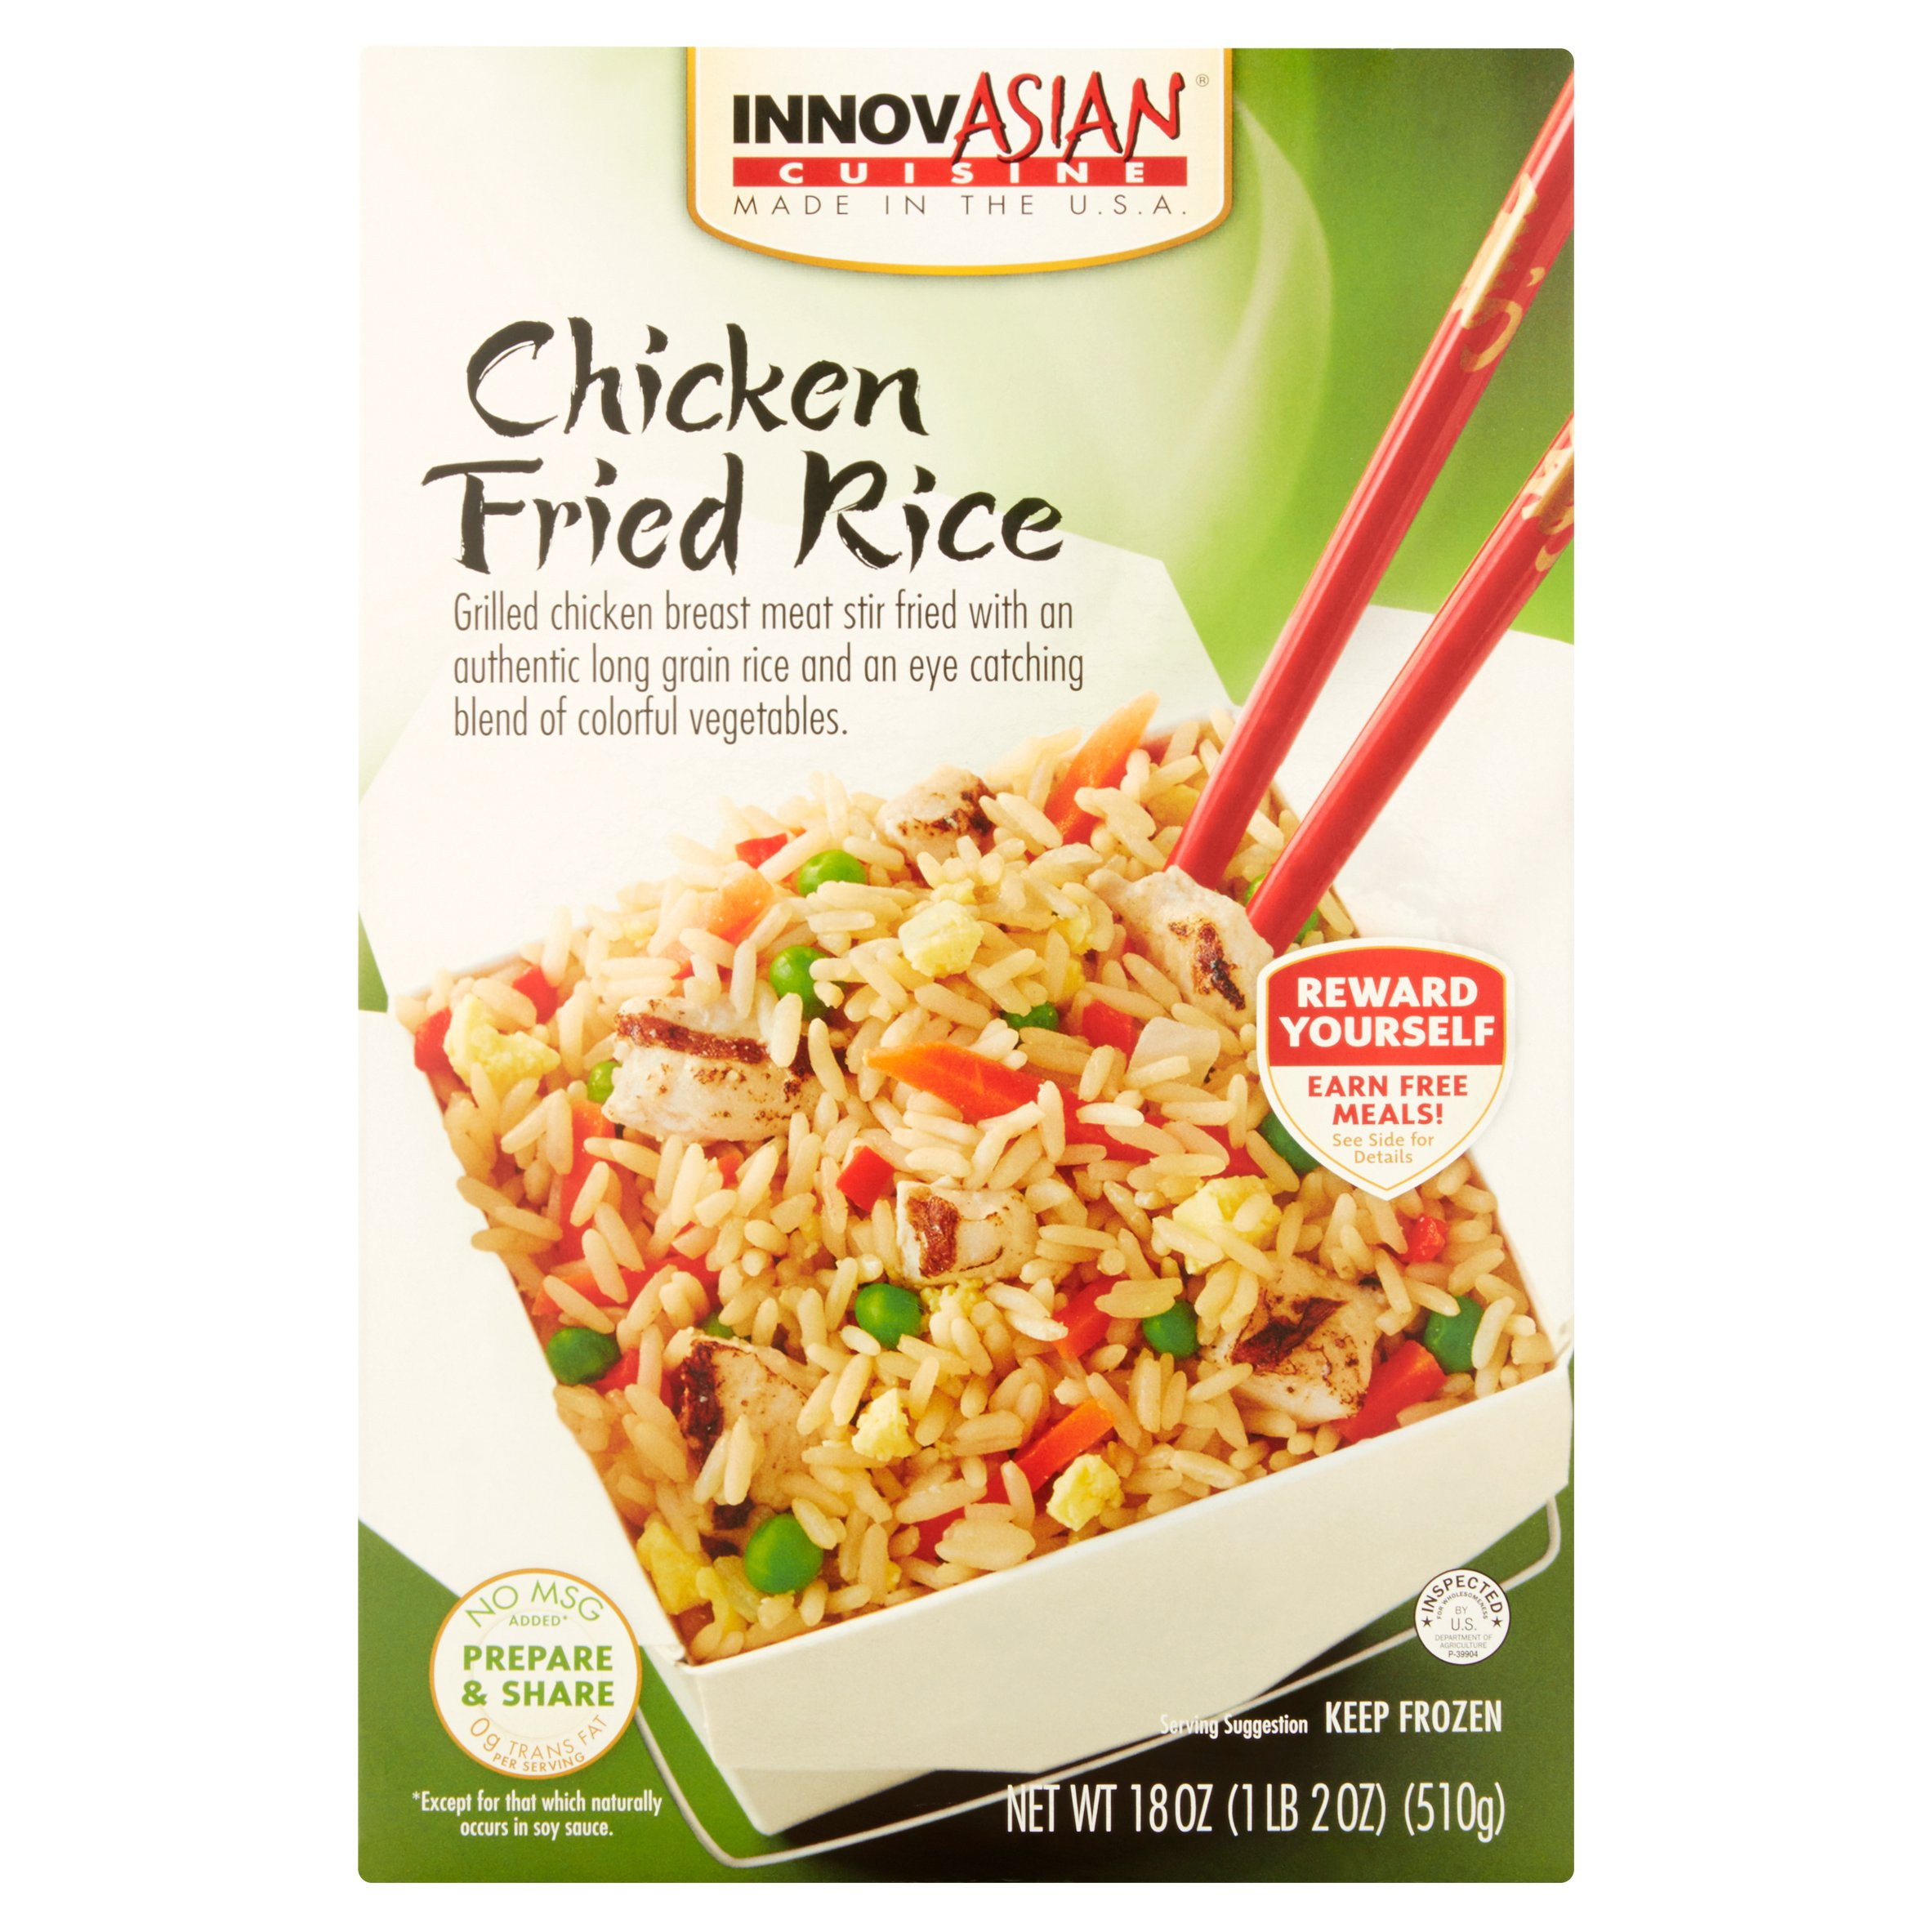 Authentic Chicken Fried Rice
 authentic chicken fried rice